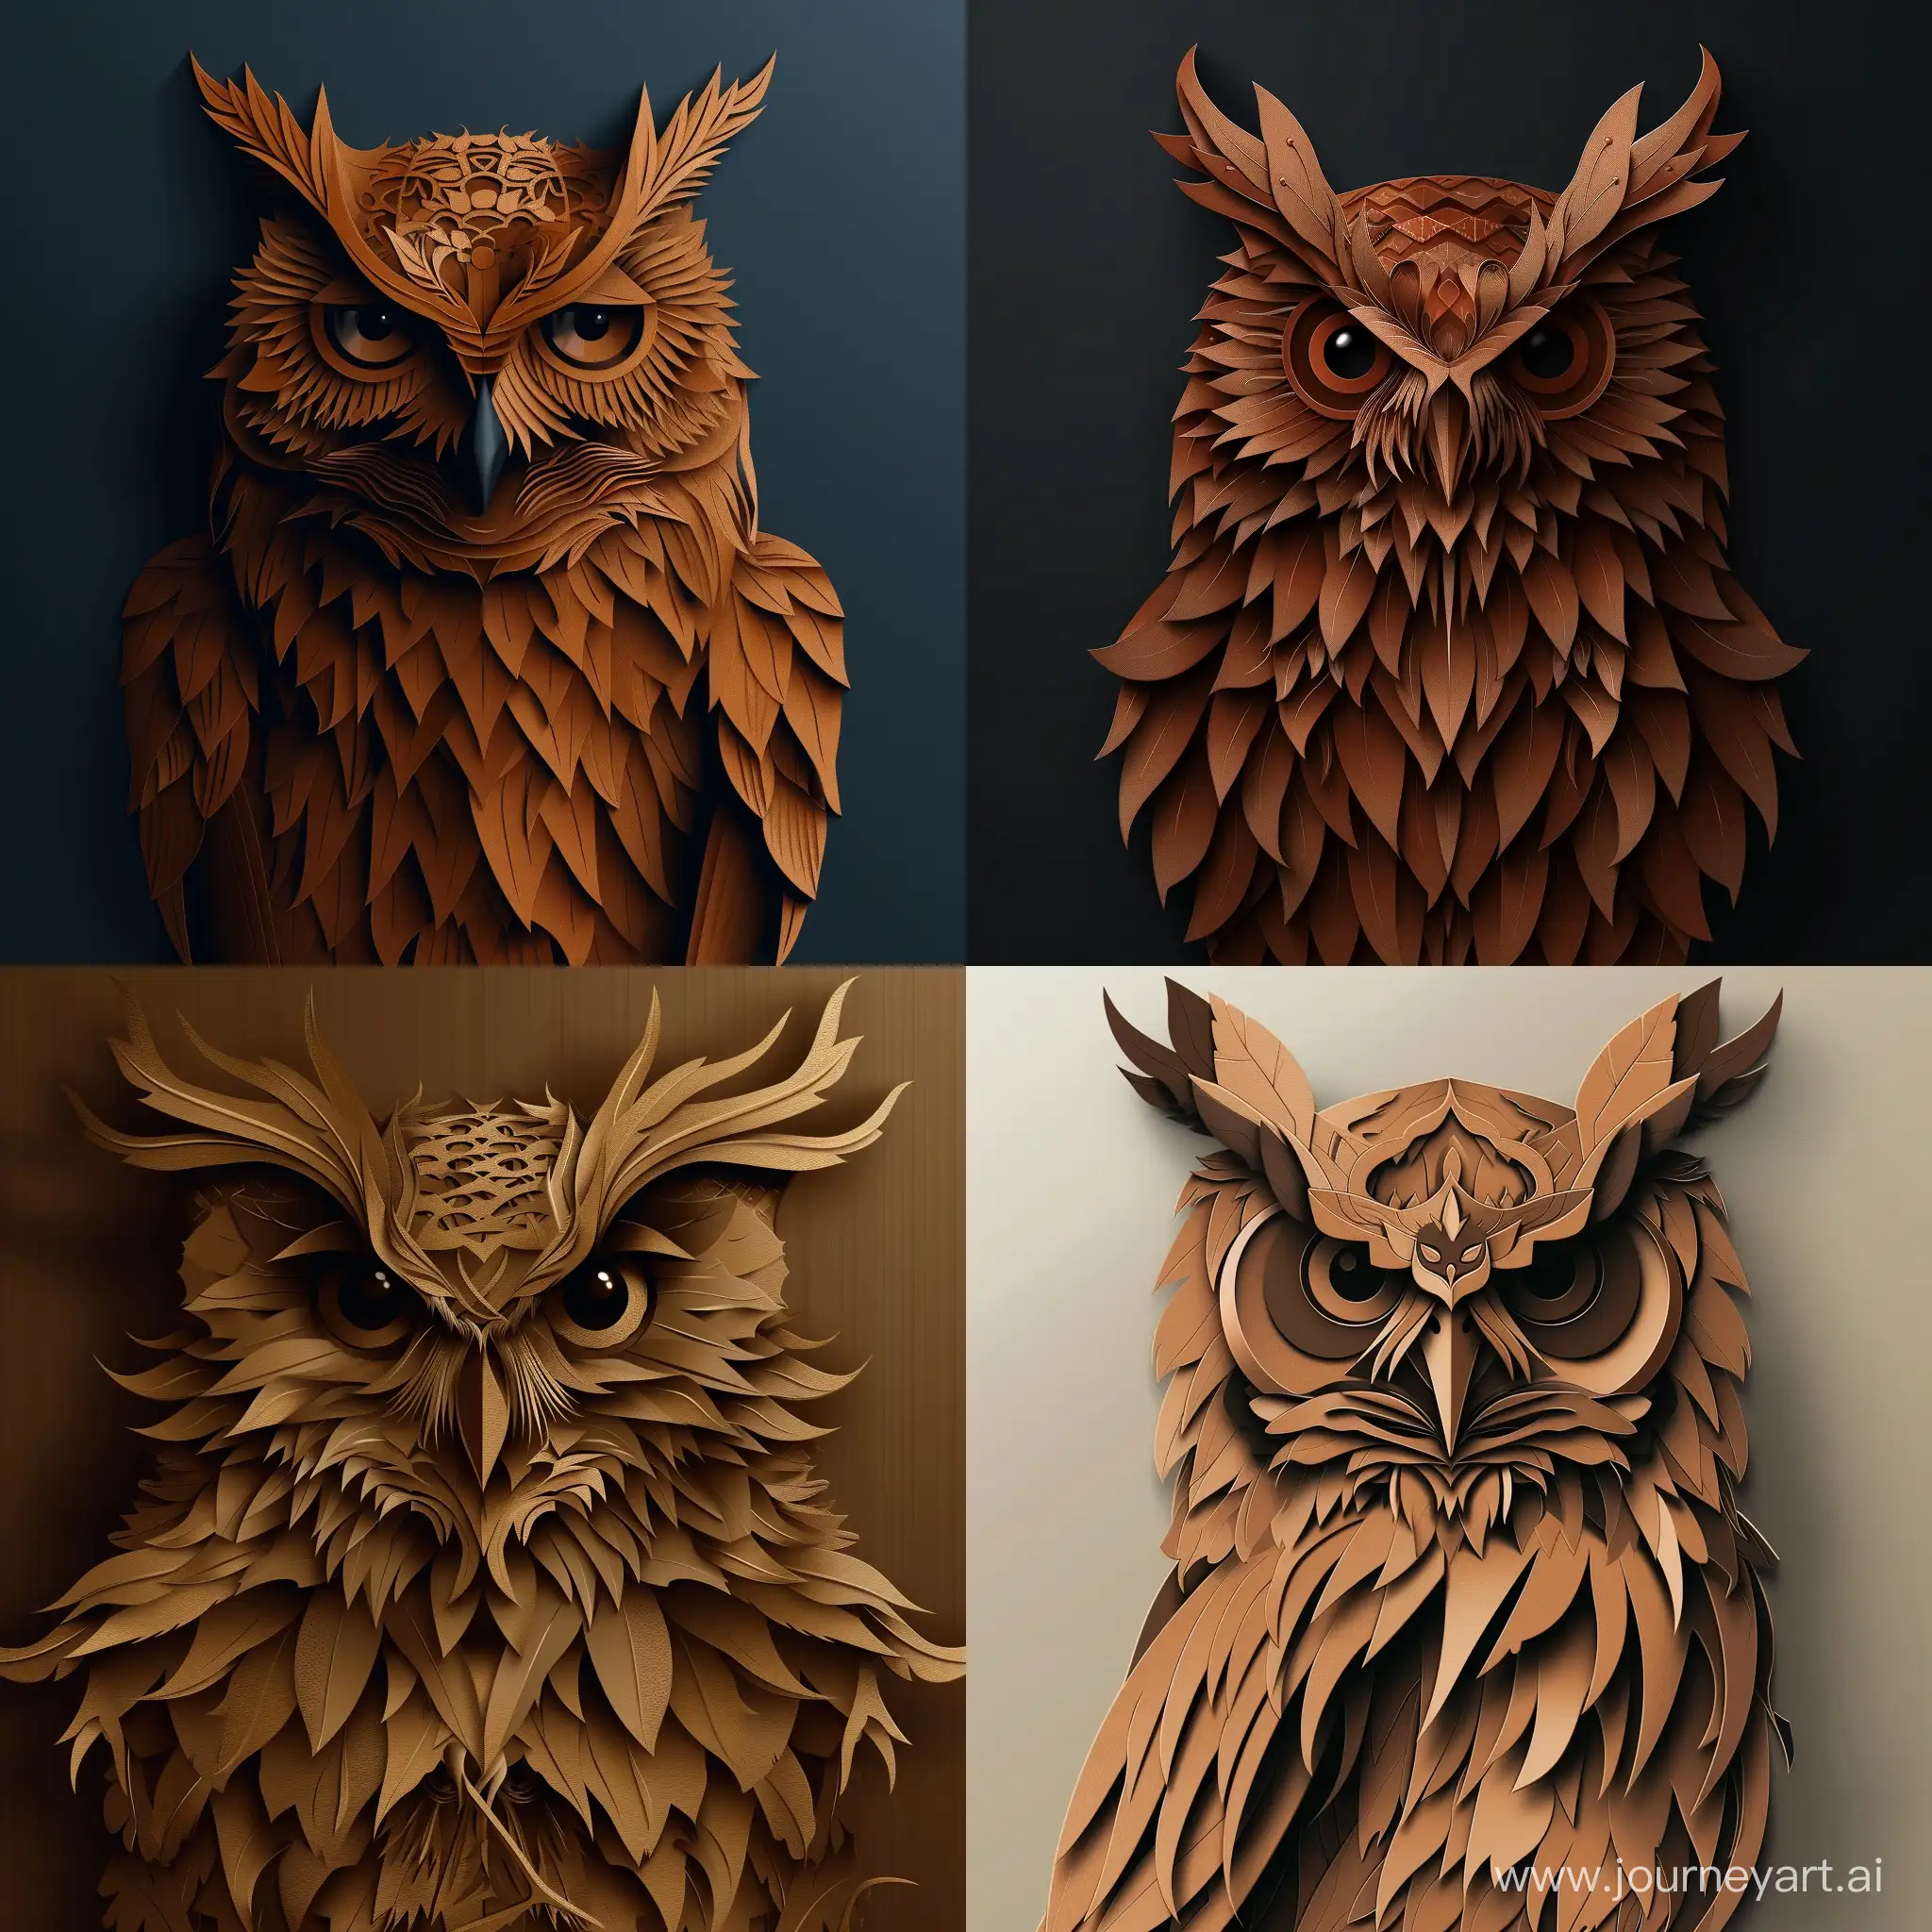 cut paper art of a majestic owl with piercing eyes and a regal stance. Its feathers are a rich brown with hints of darker shades, conveying a sense of authority. The owl's plumage is sleek and well-groomed, topped with an impressive feathered crown that symbolizes wisdom, in high quality vector style